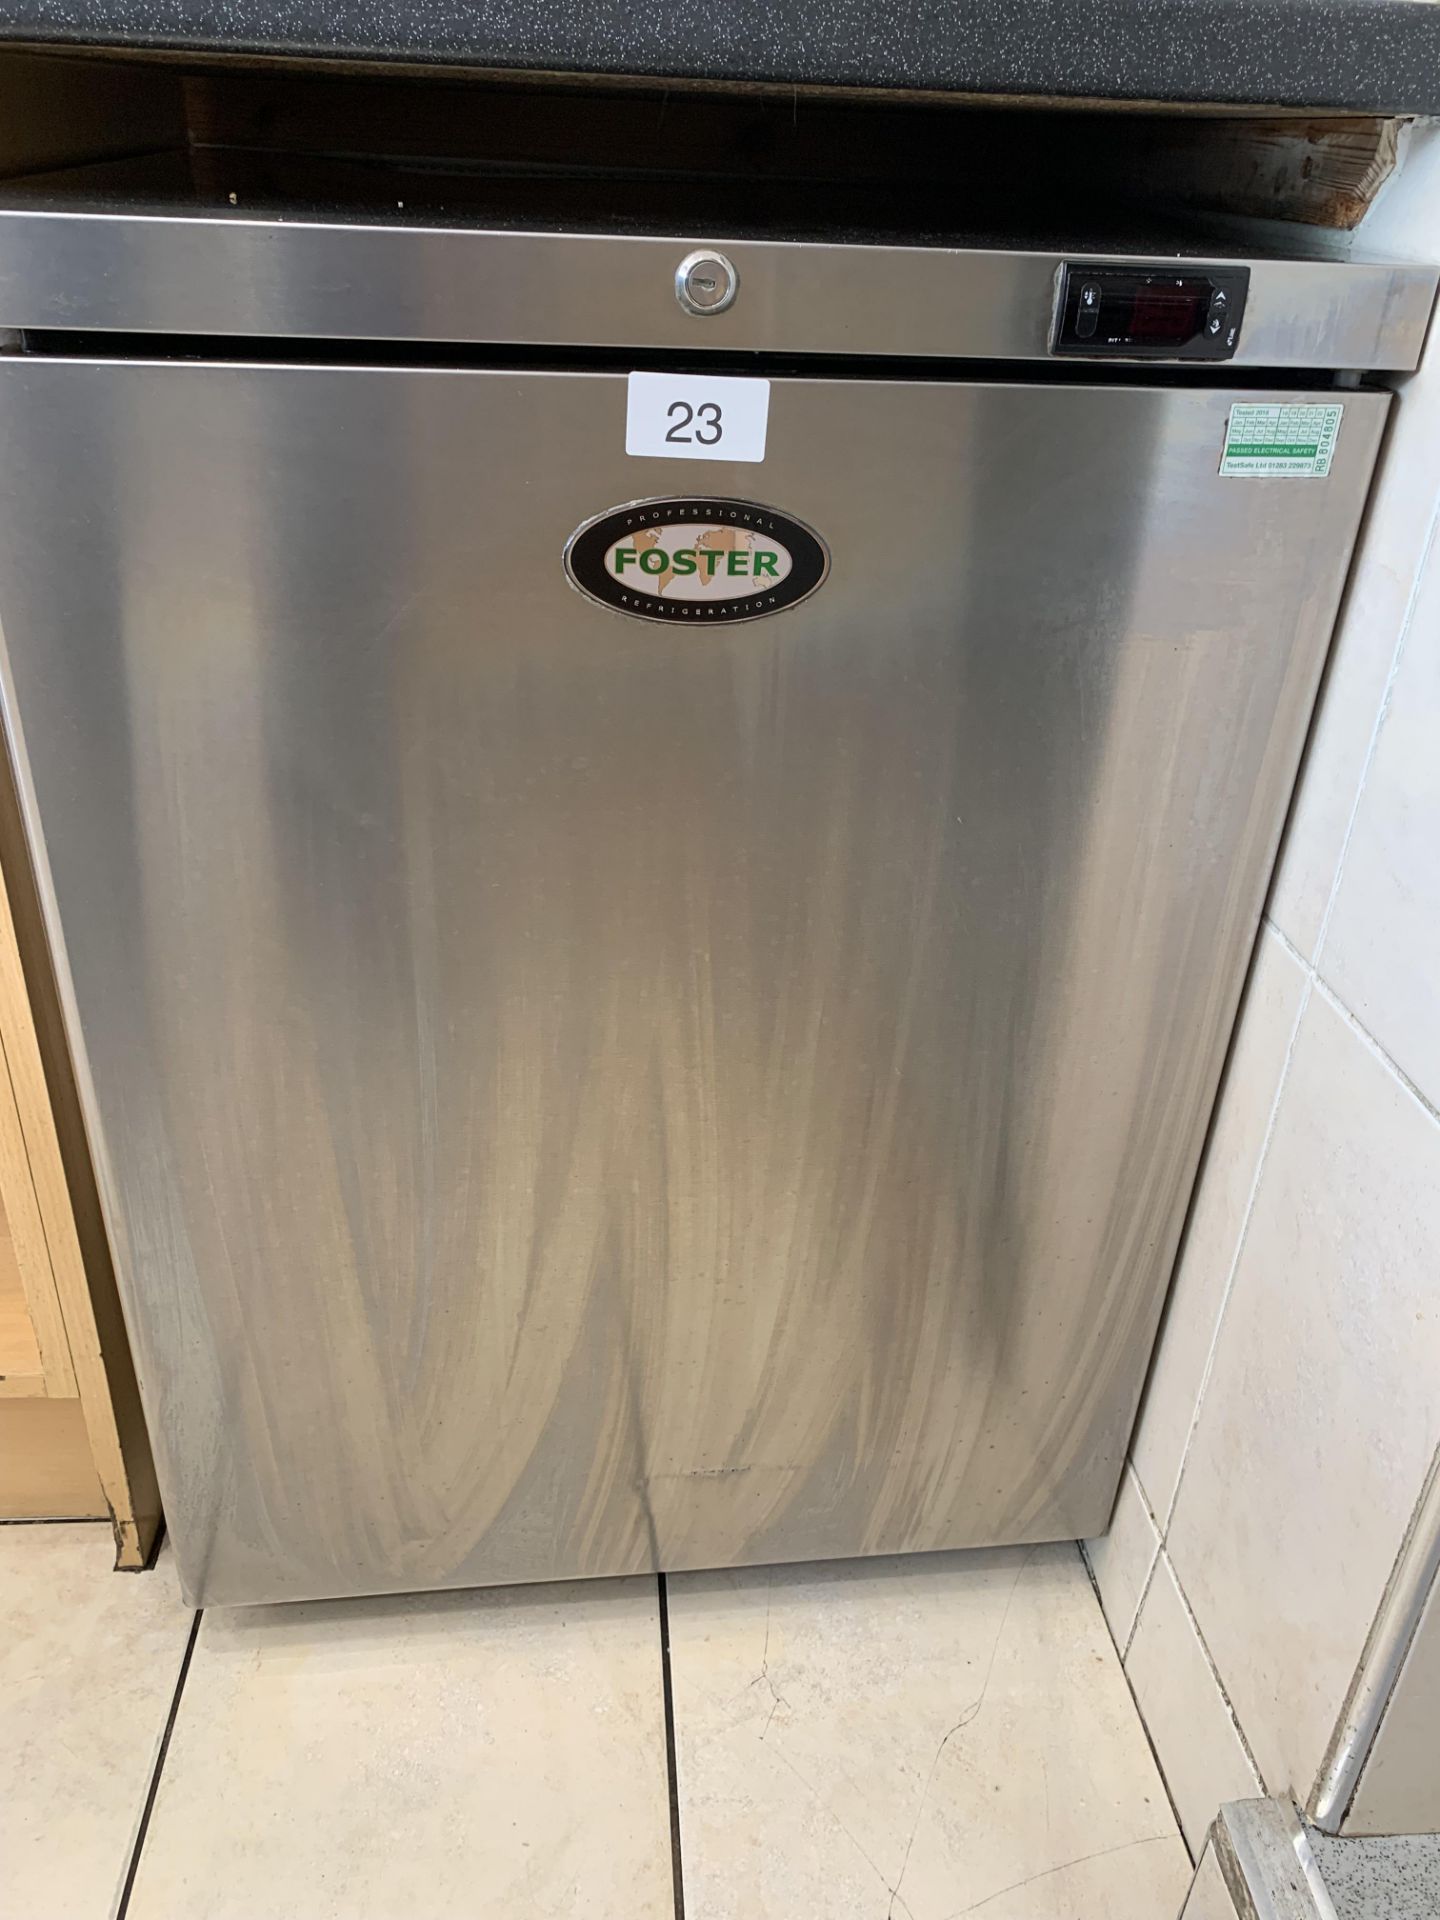 Foster Model R134A Stainless Steel under counter fridge